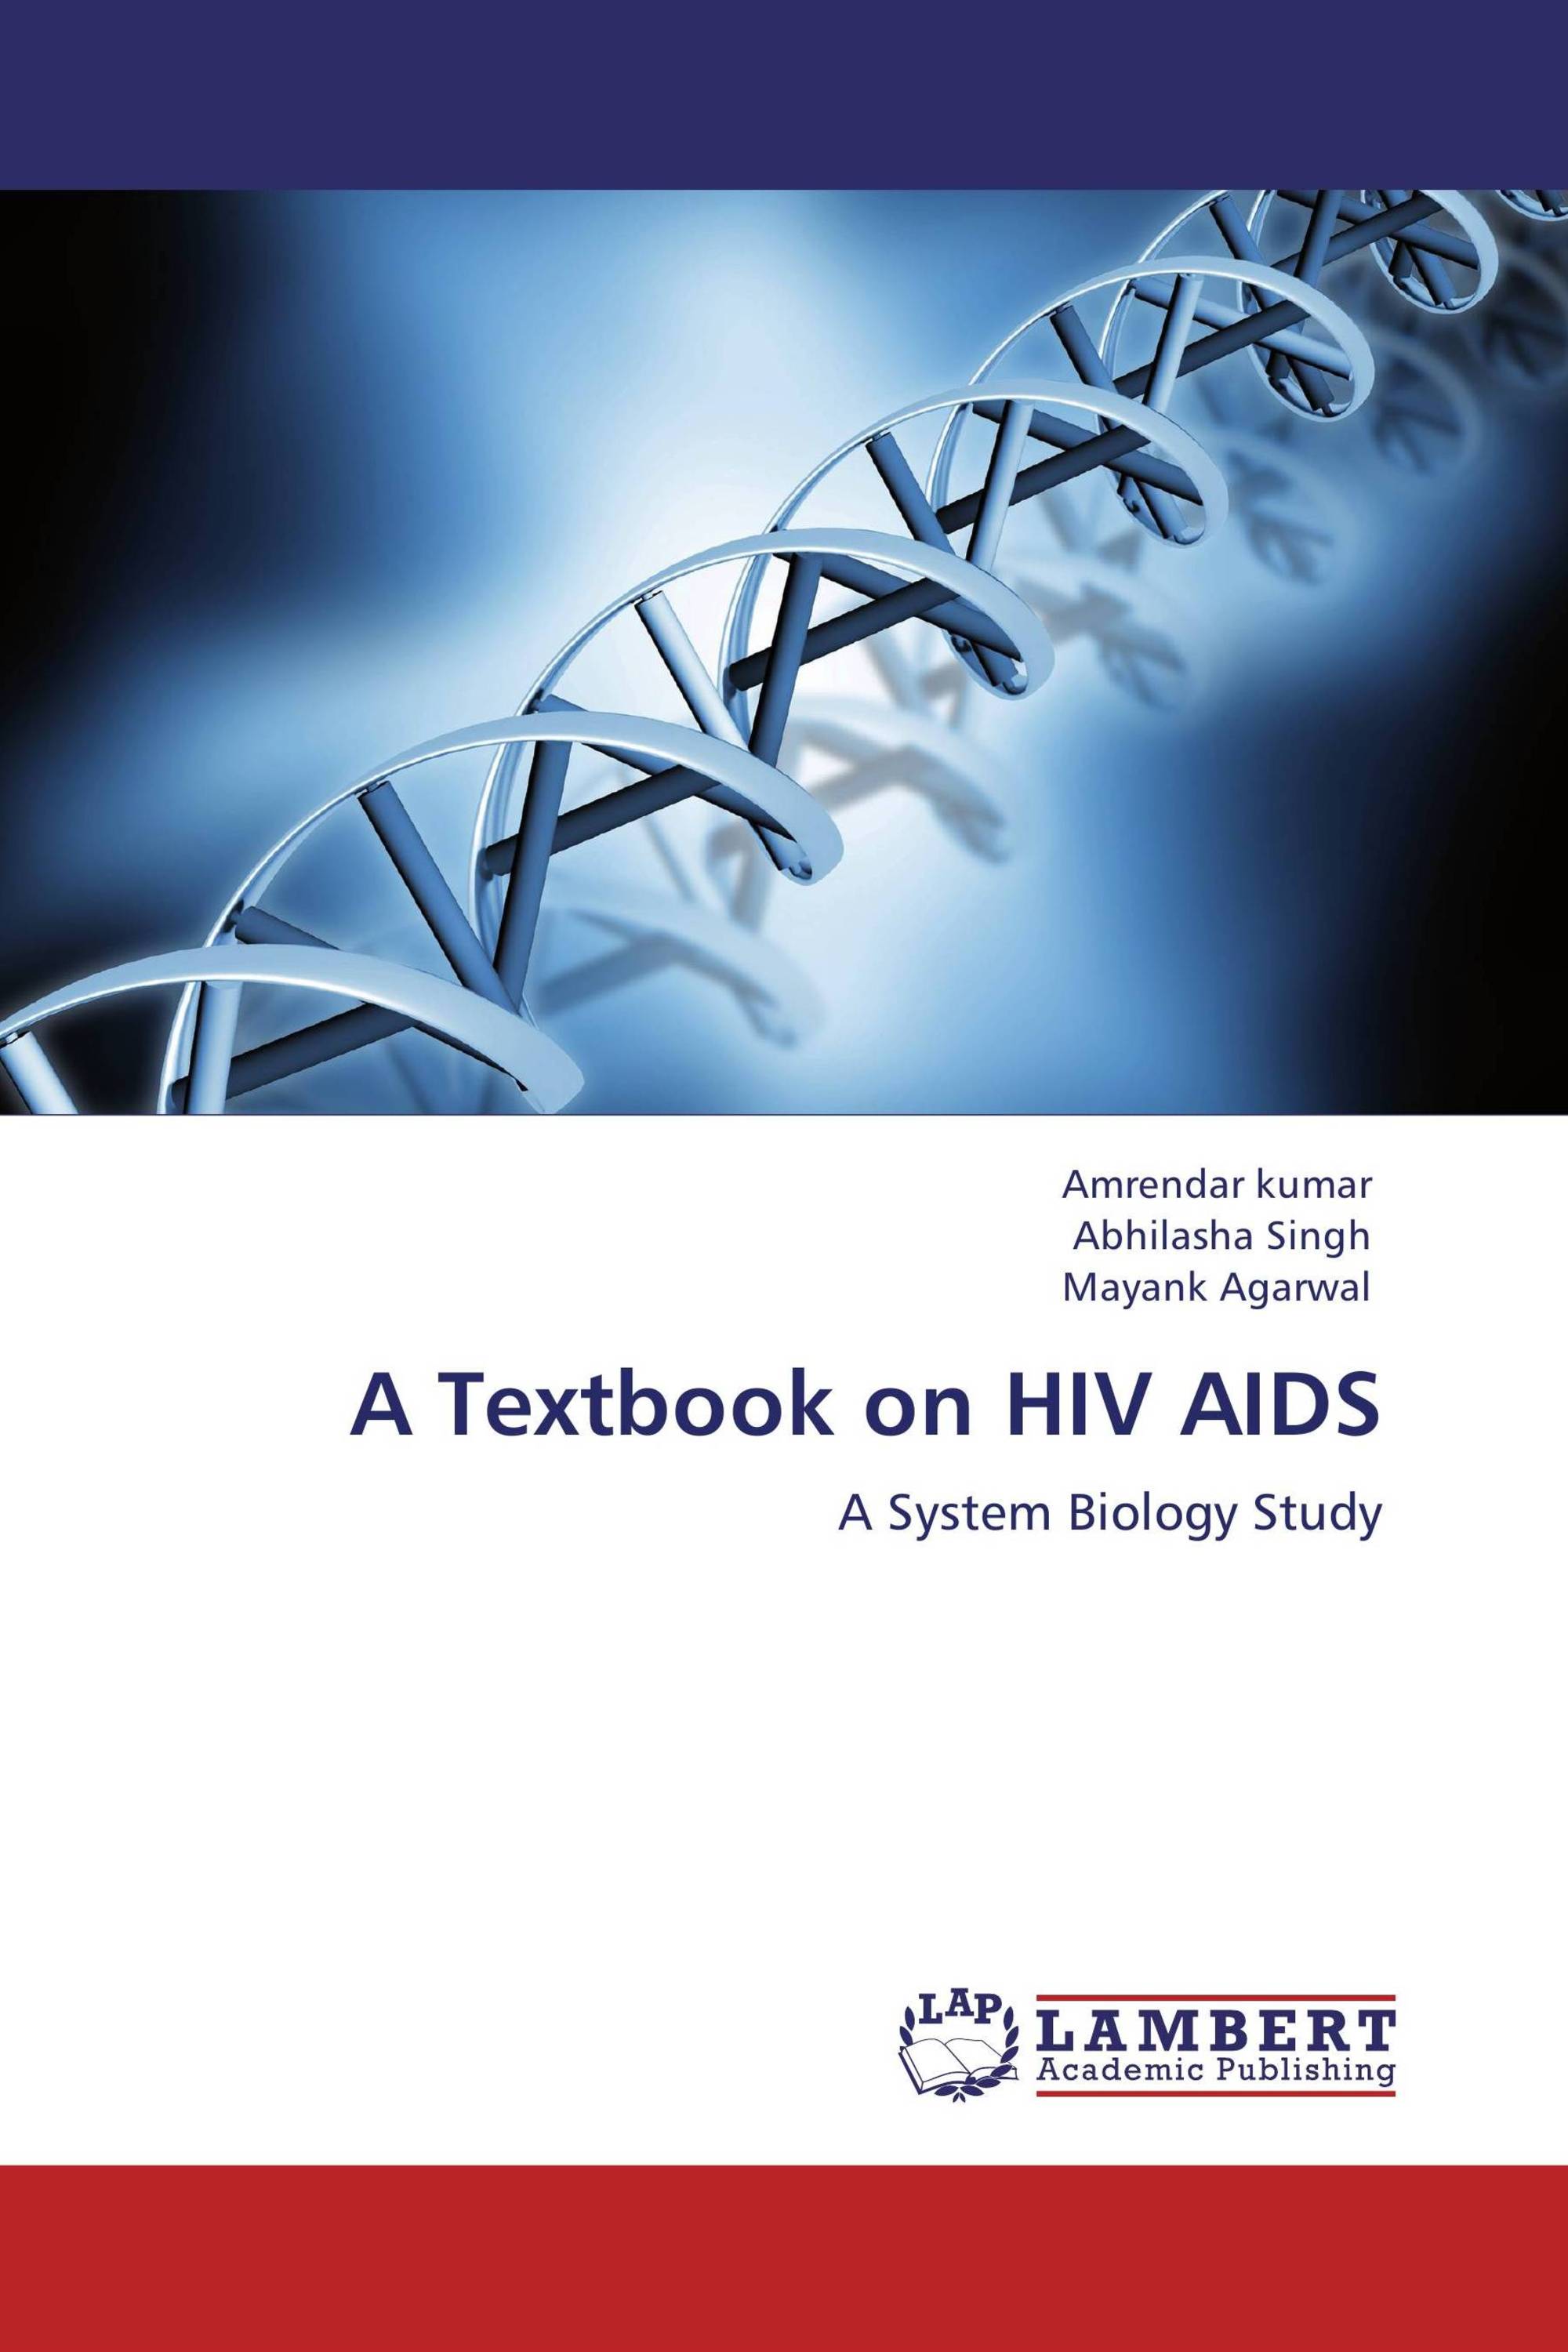 research books on hiv